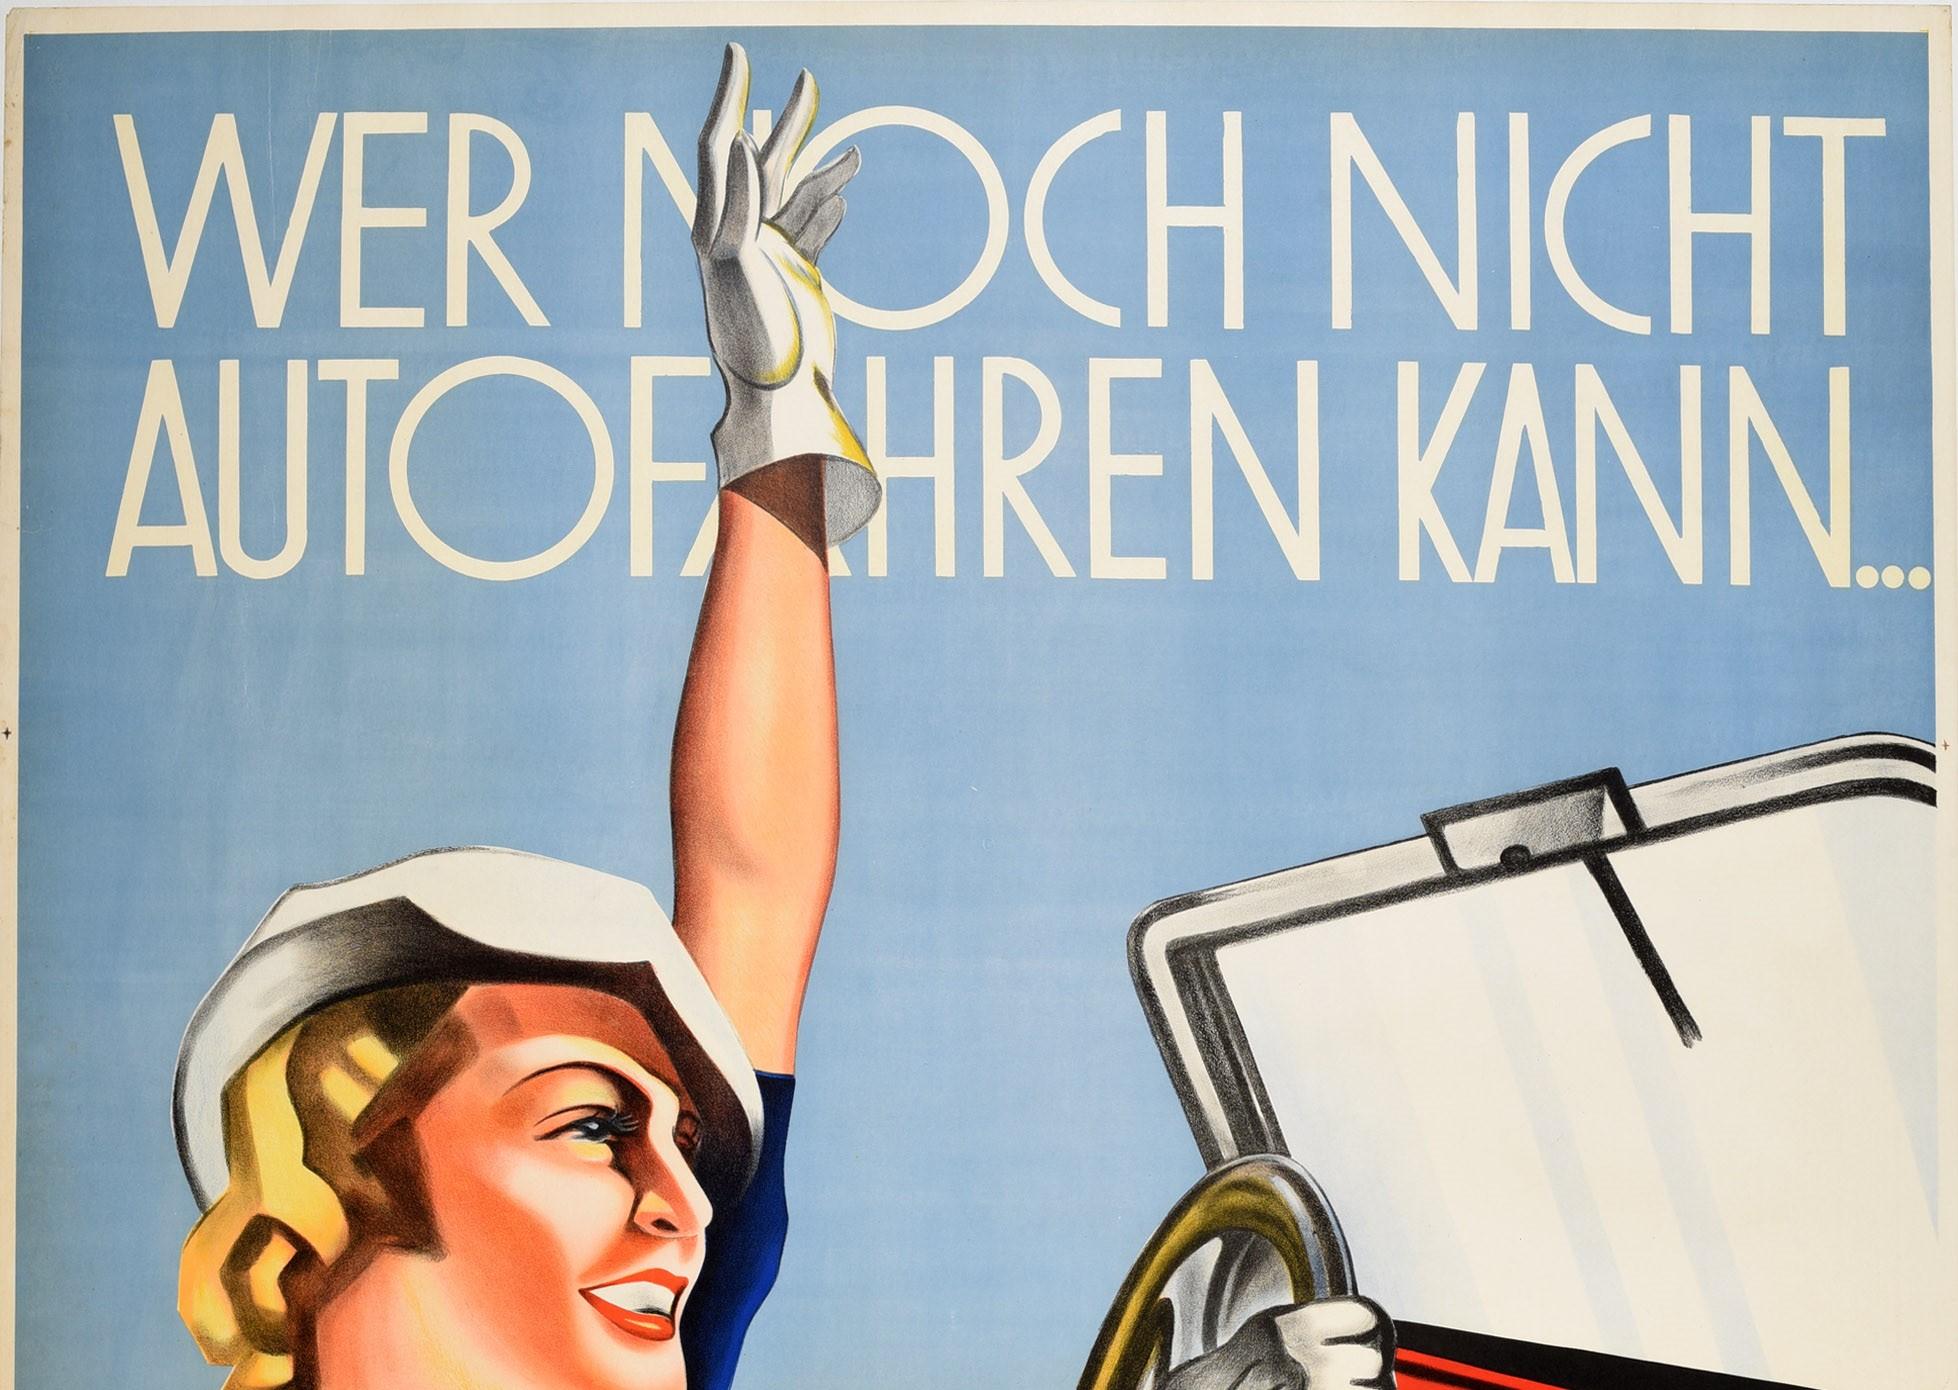 Original Vintage Art Deco Style Advertising Poster For Lattermann Driving School - Print by Hussl and Raudnitzky